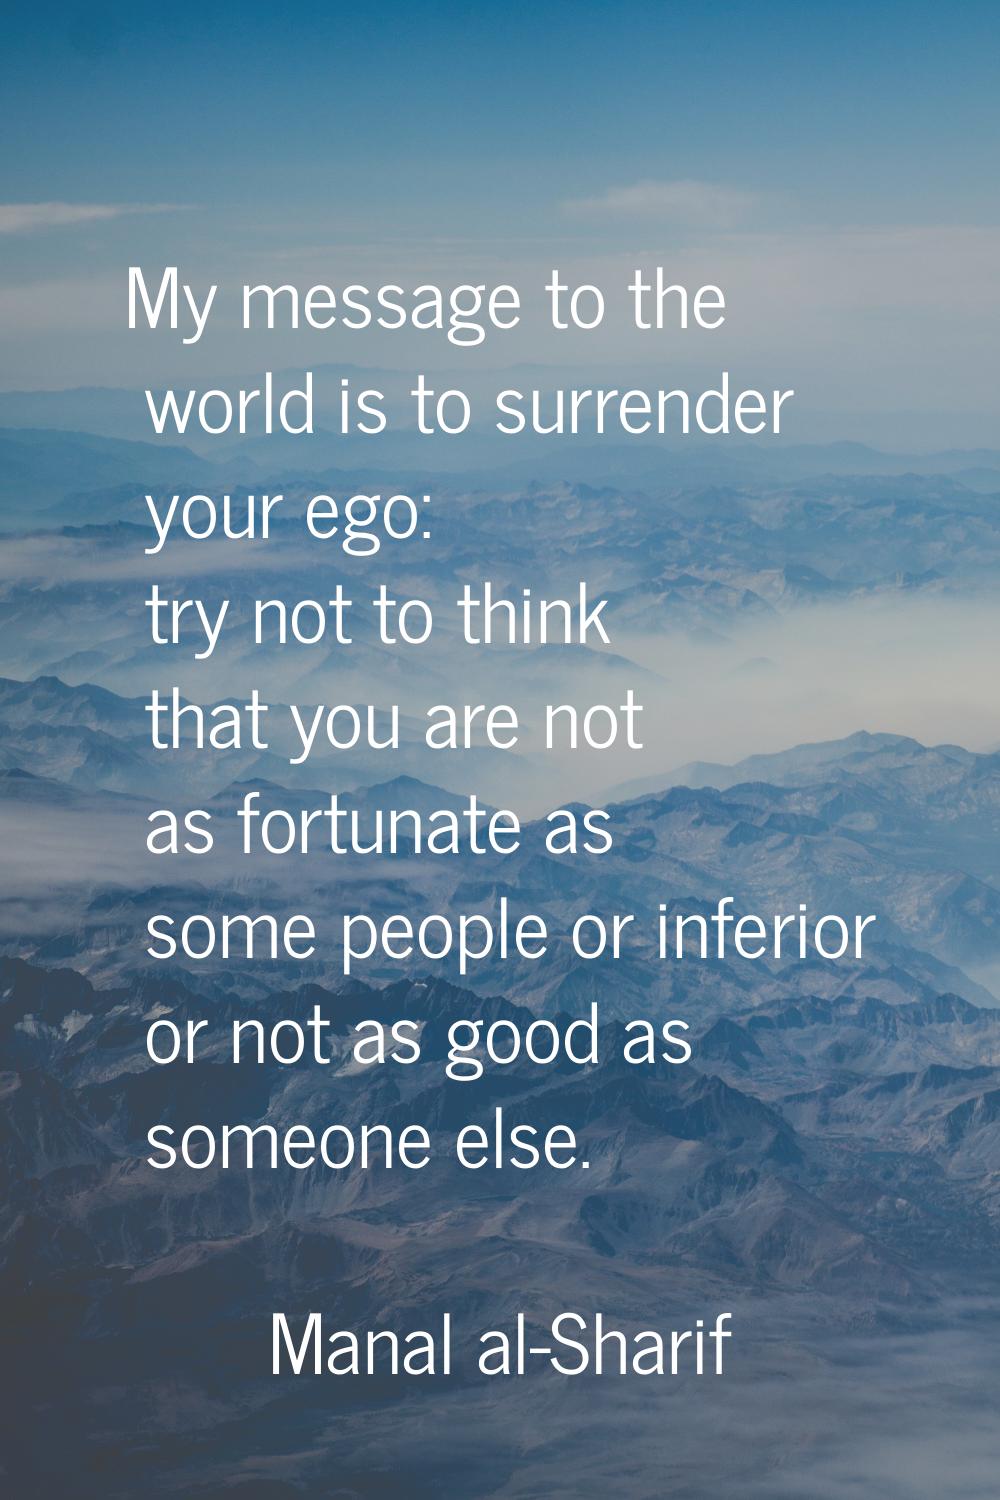 My message to the world is to surrender your ego: try not to think that you are not as fortunate as